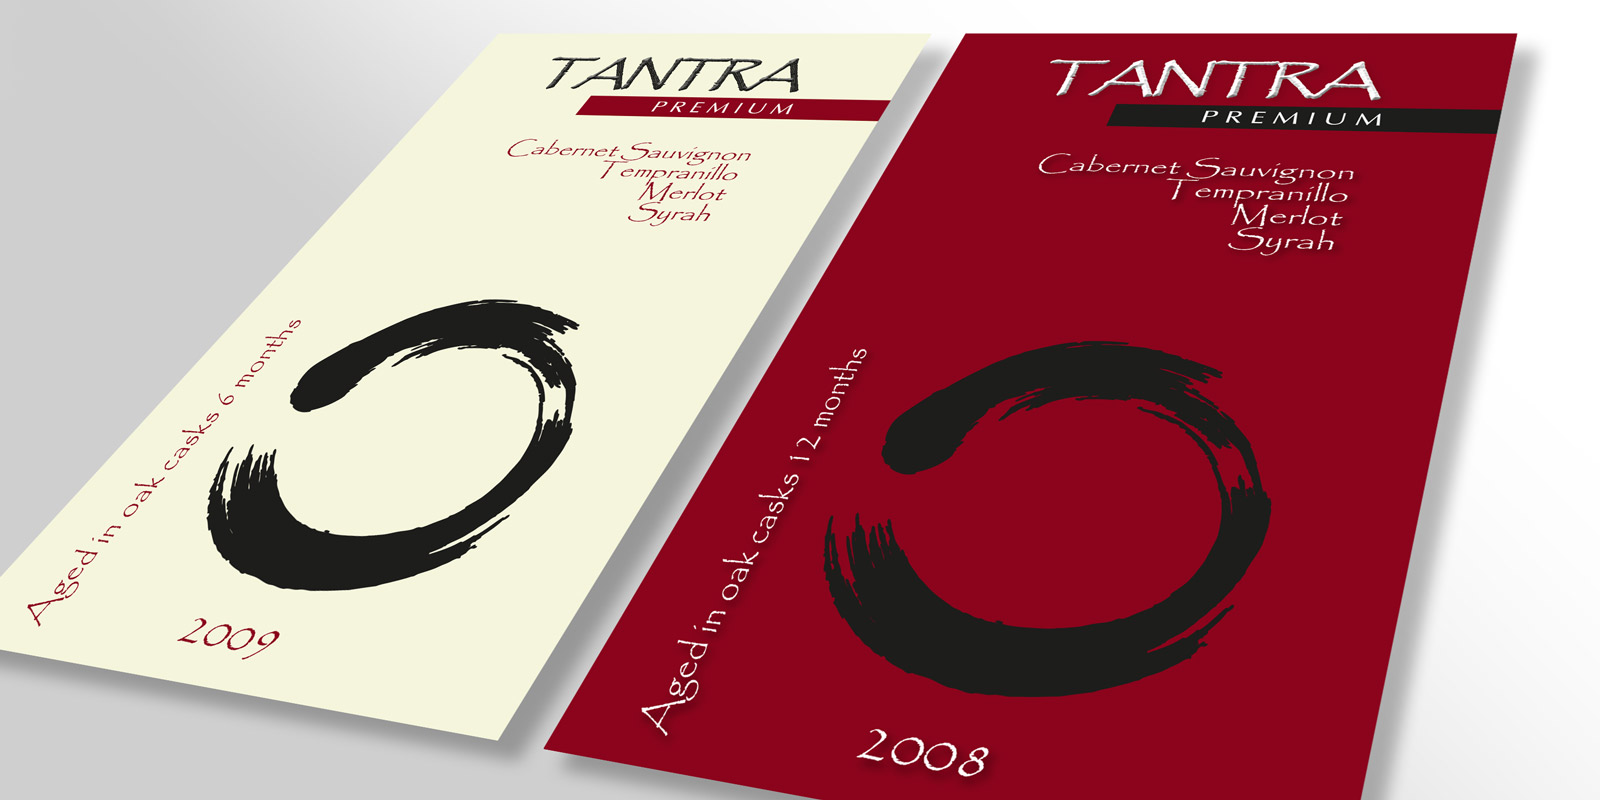 Portfolio of graphic and creative design works on wine labels and packaging for Spanish wine: TANTRA for wines and wineries